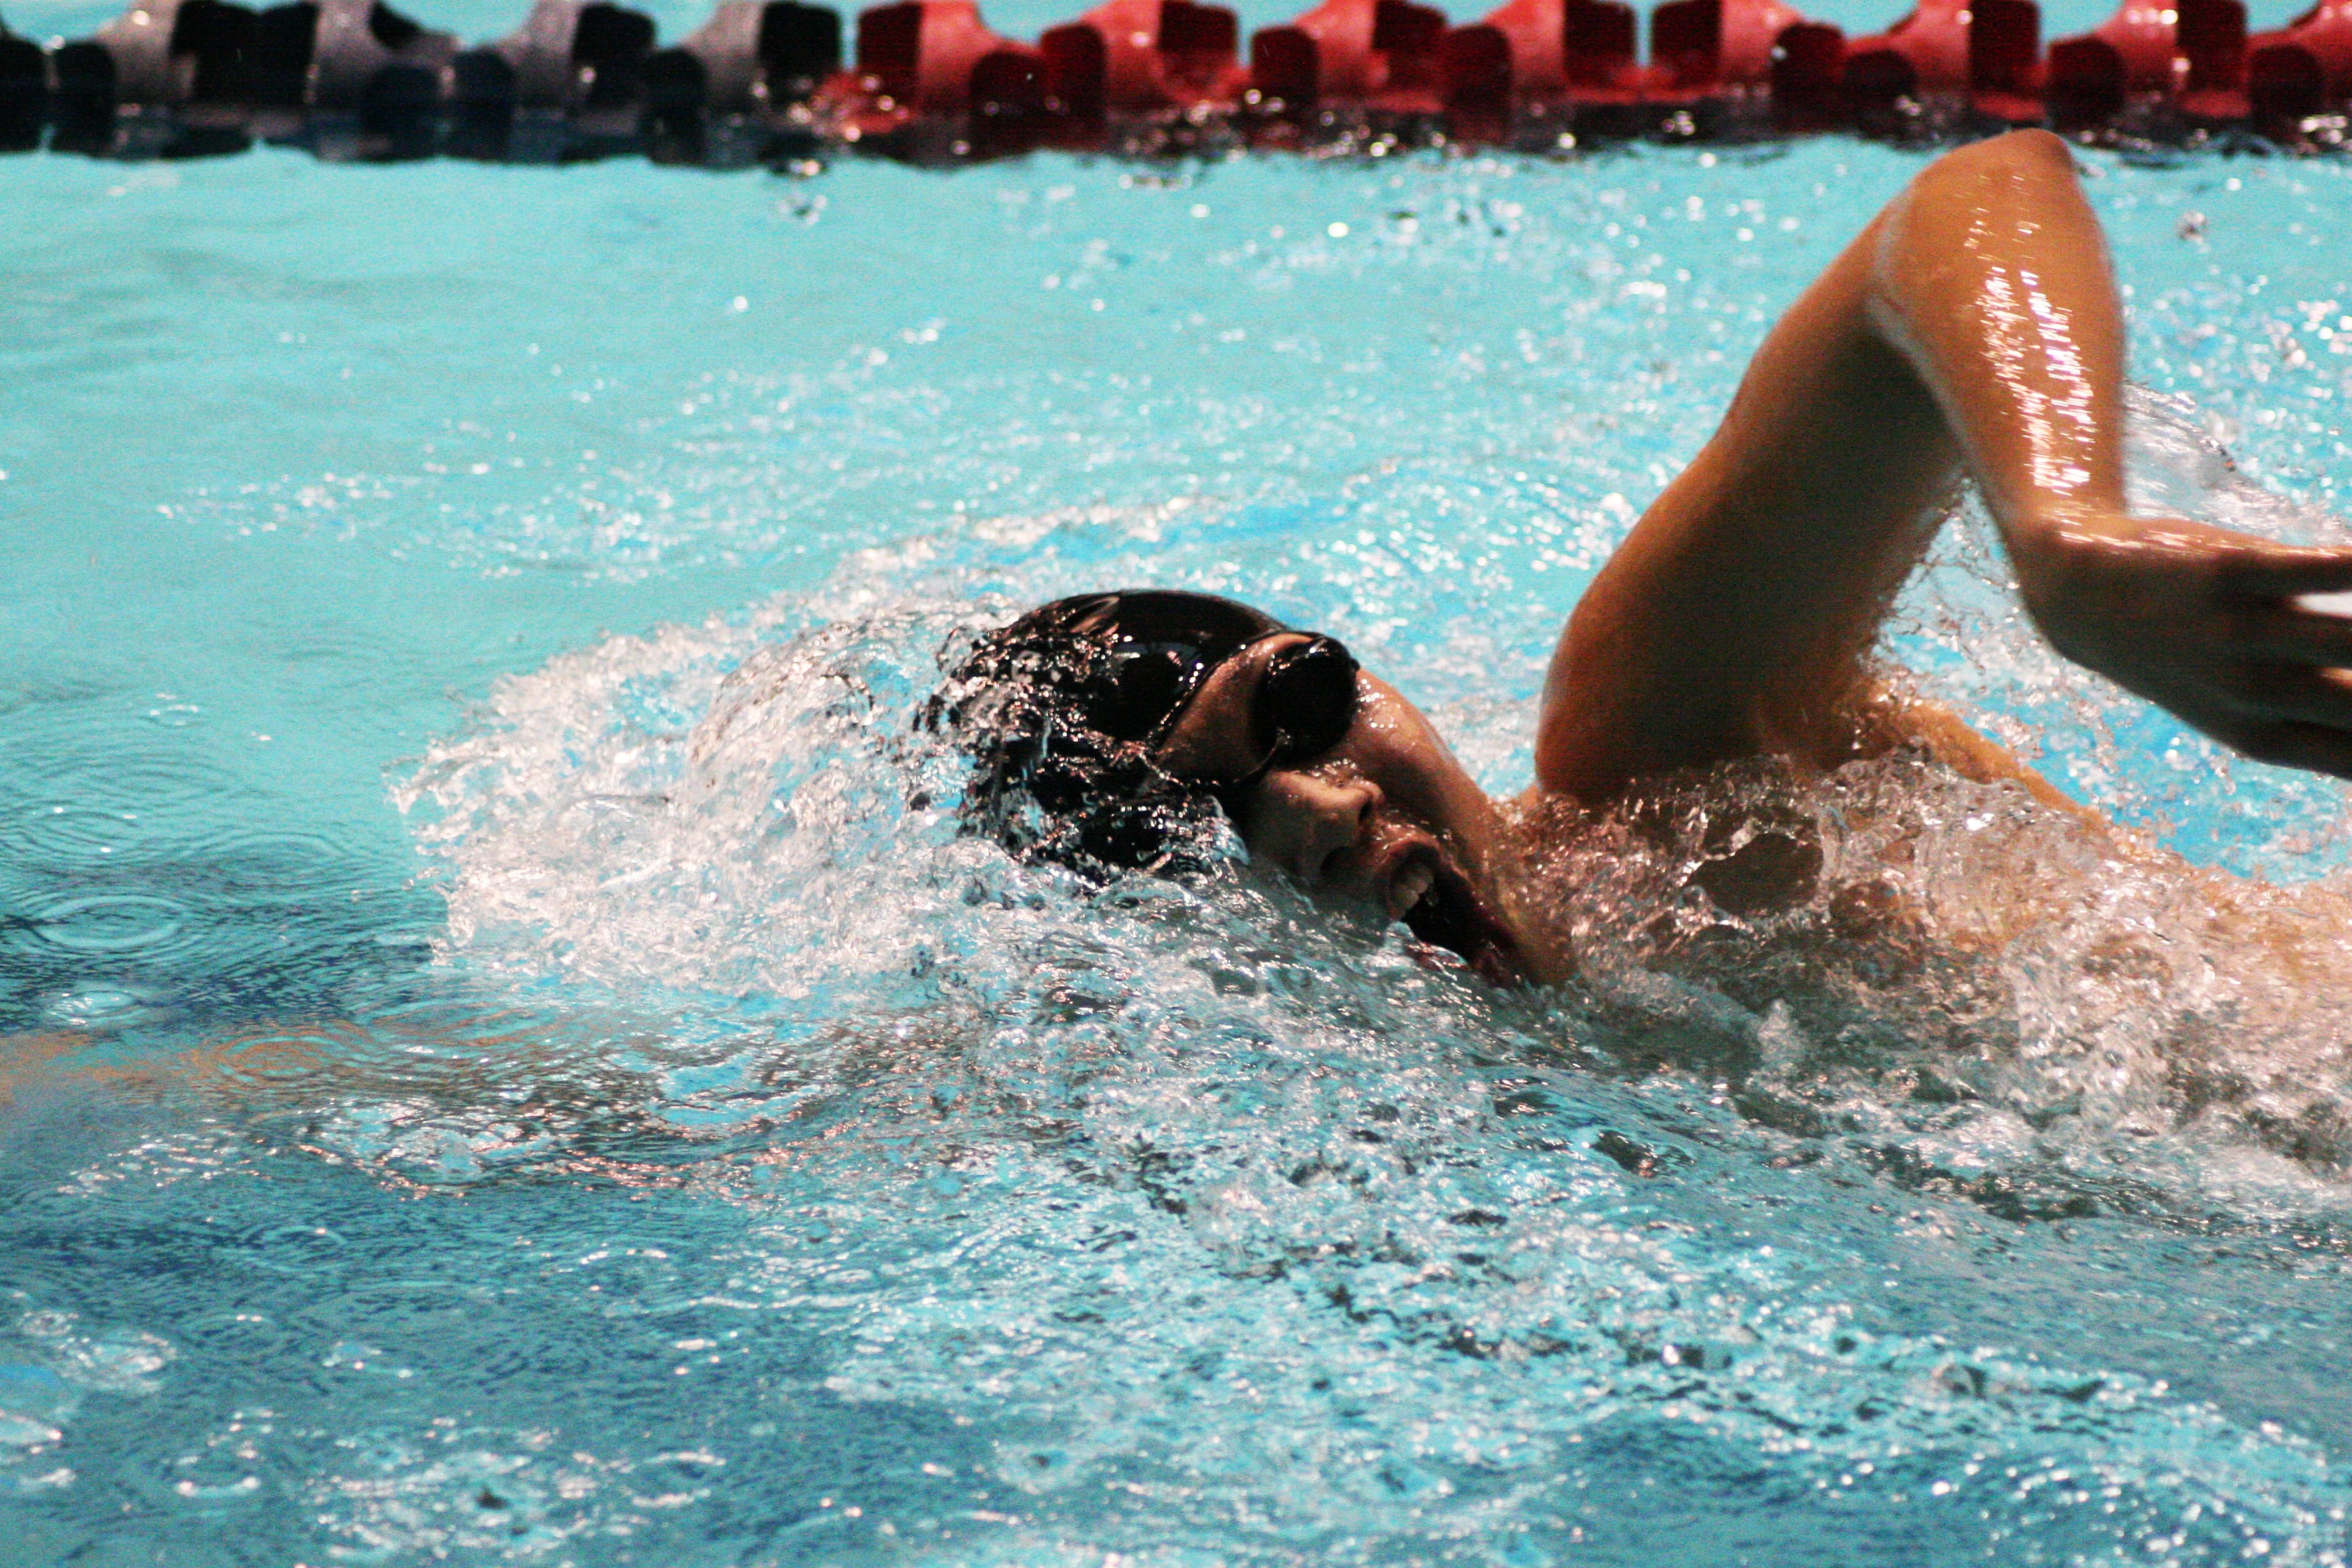 Mark Kim finished in fifth place in the 500 freestyle with a school record time of 4:46.04.